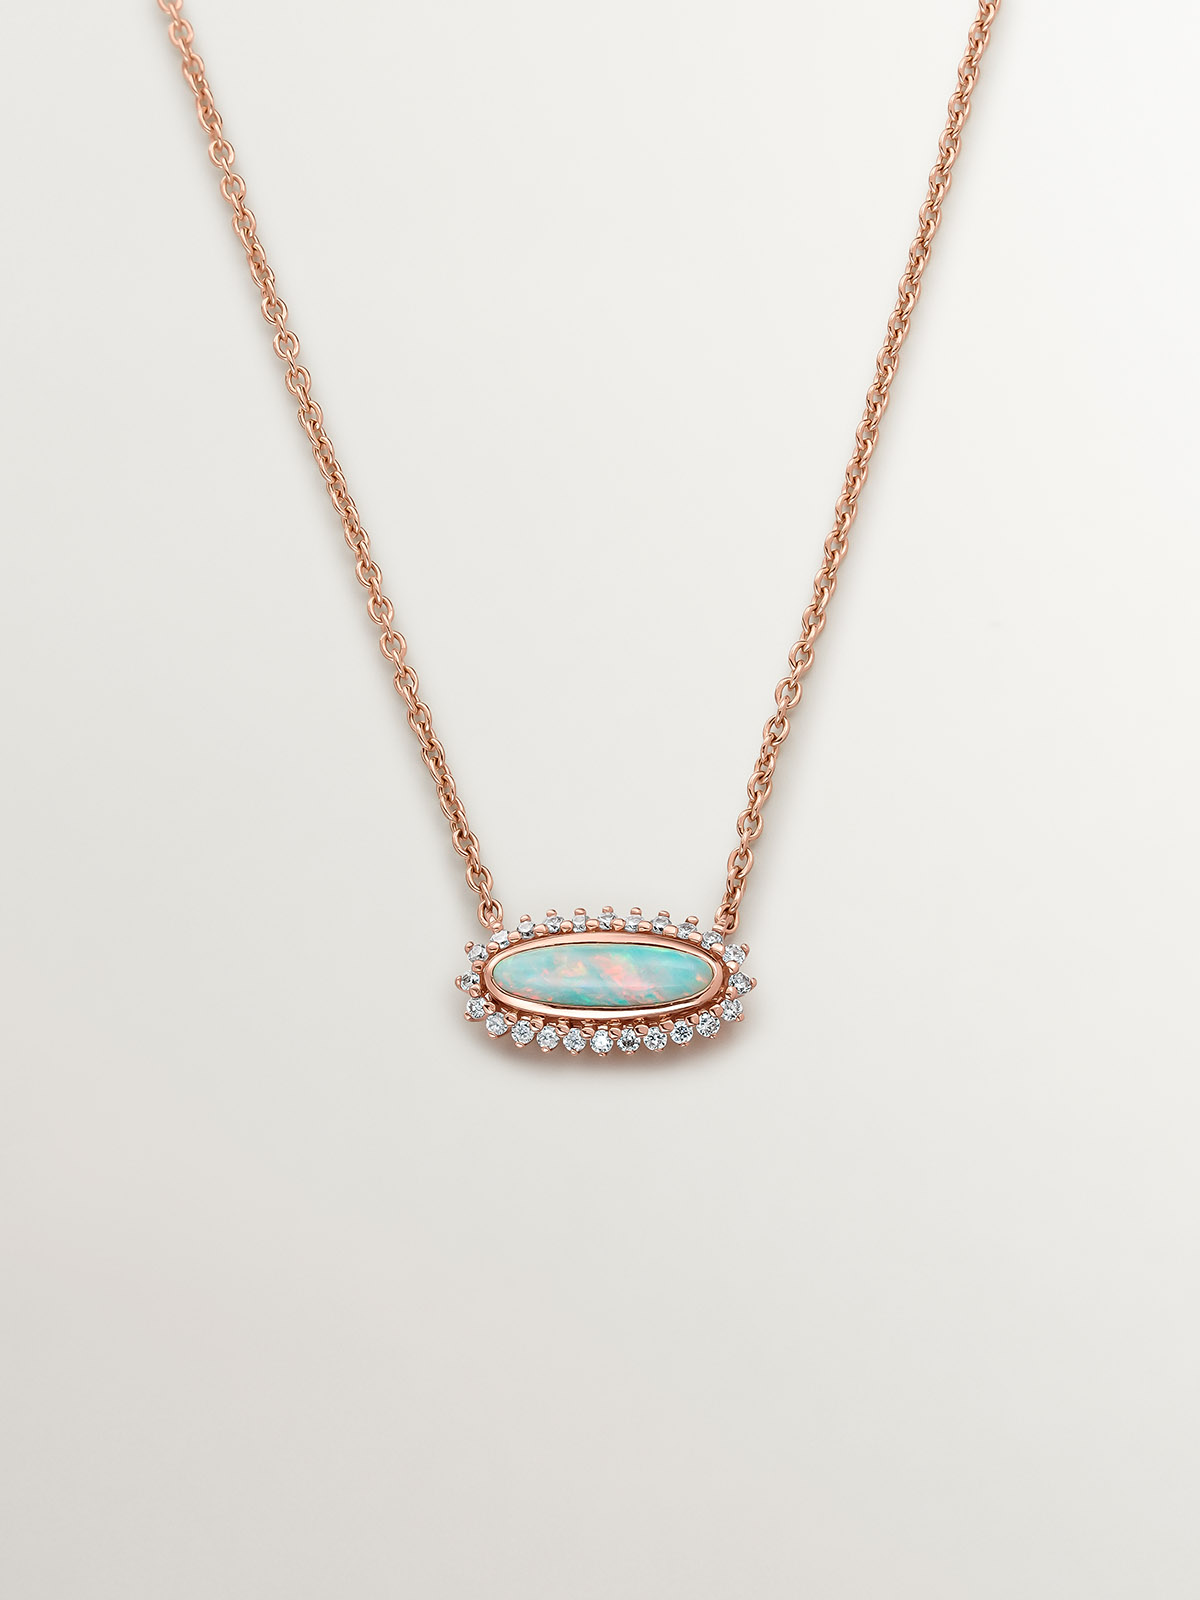 18K Rose Gold Necklace with White Opal and Diamonds